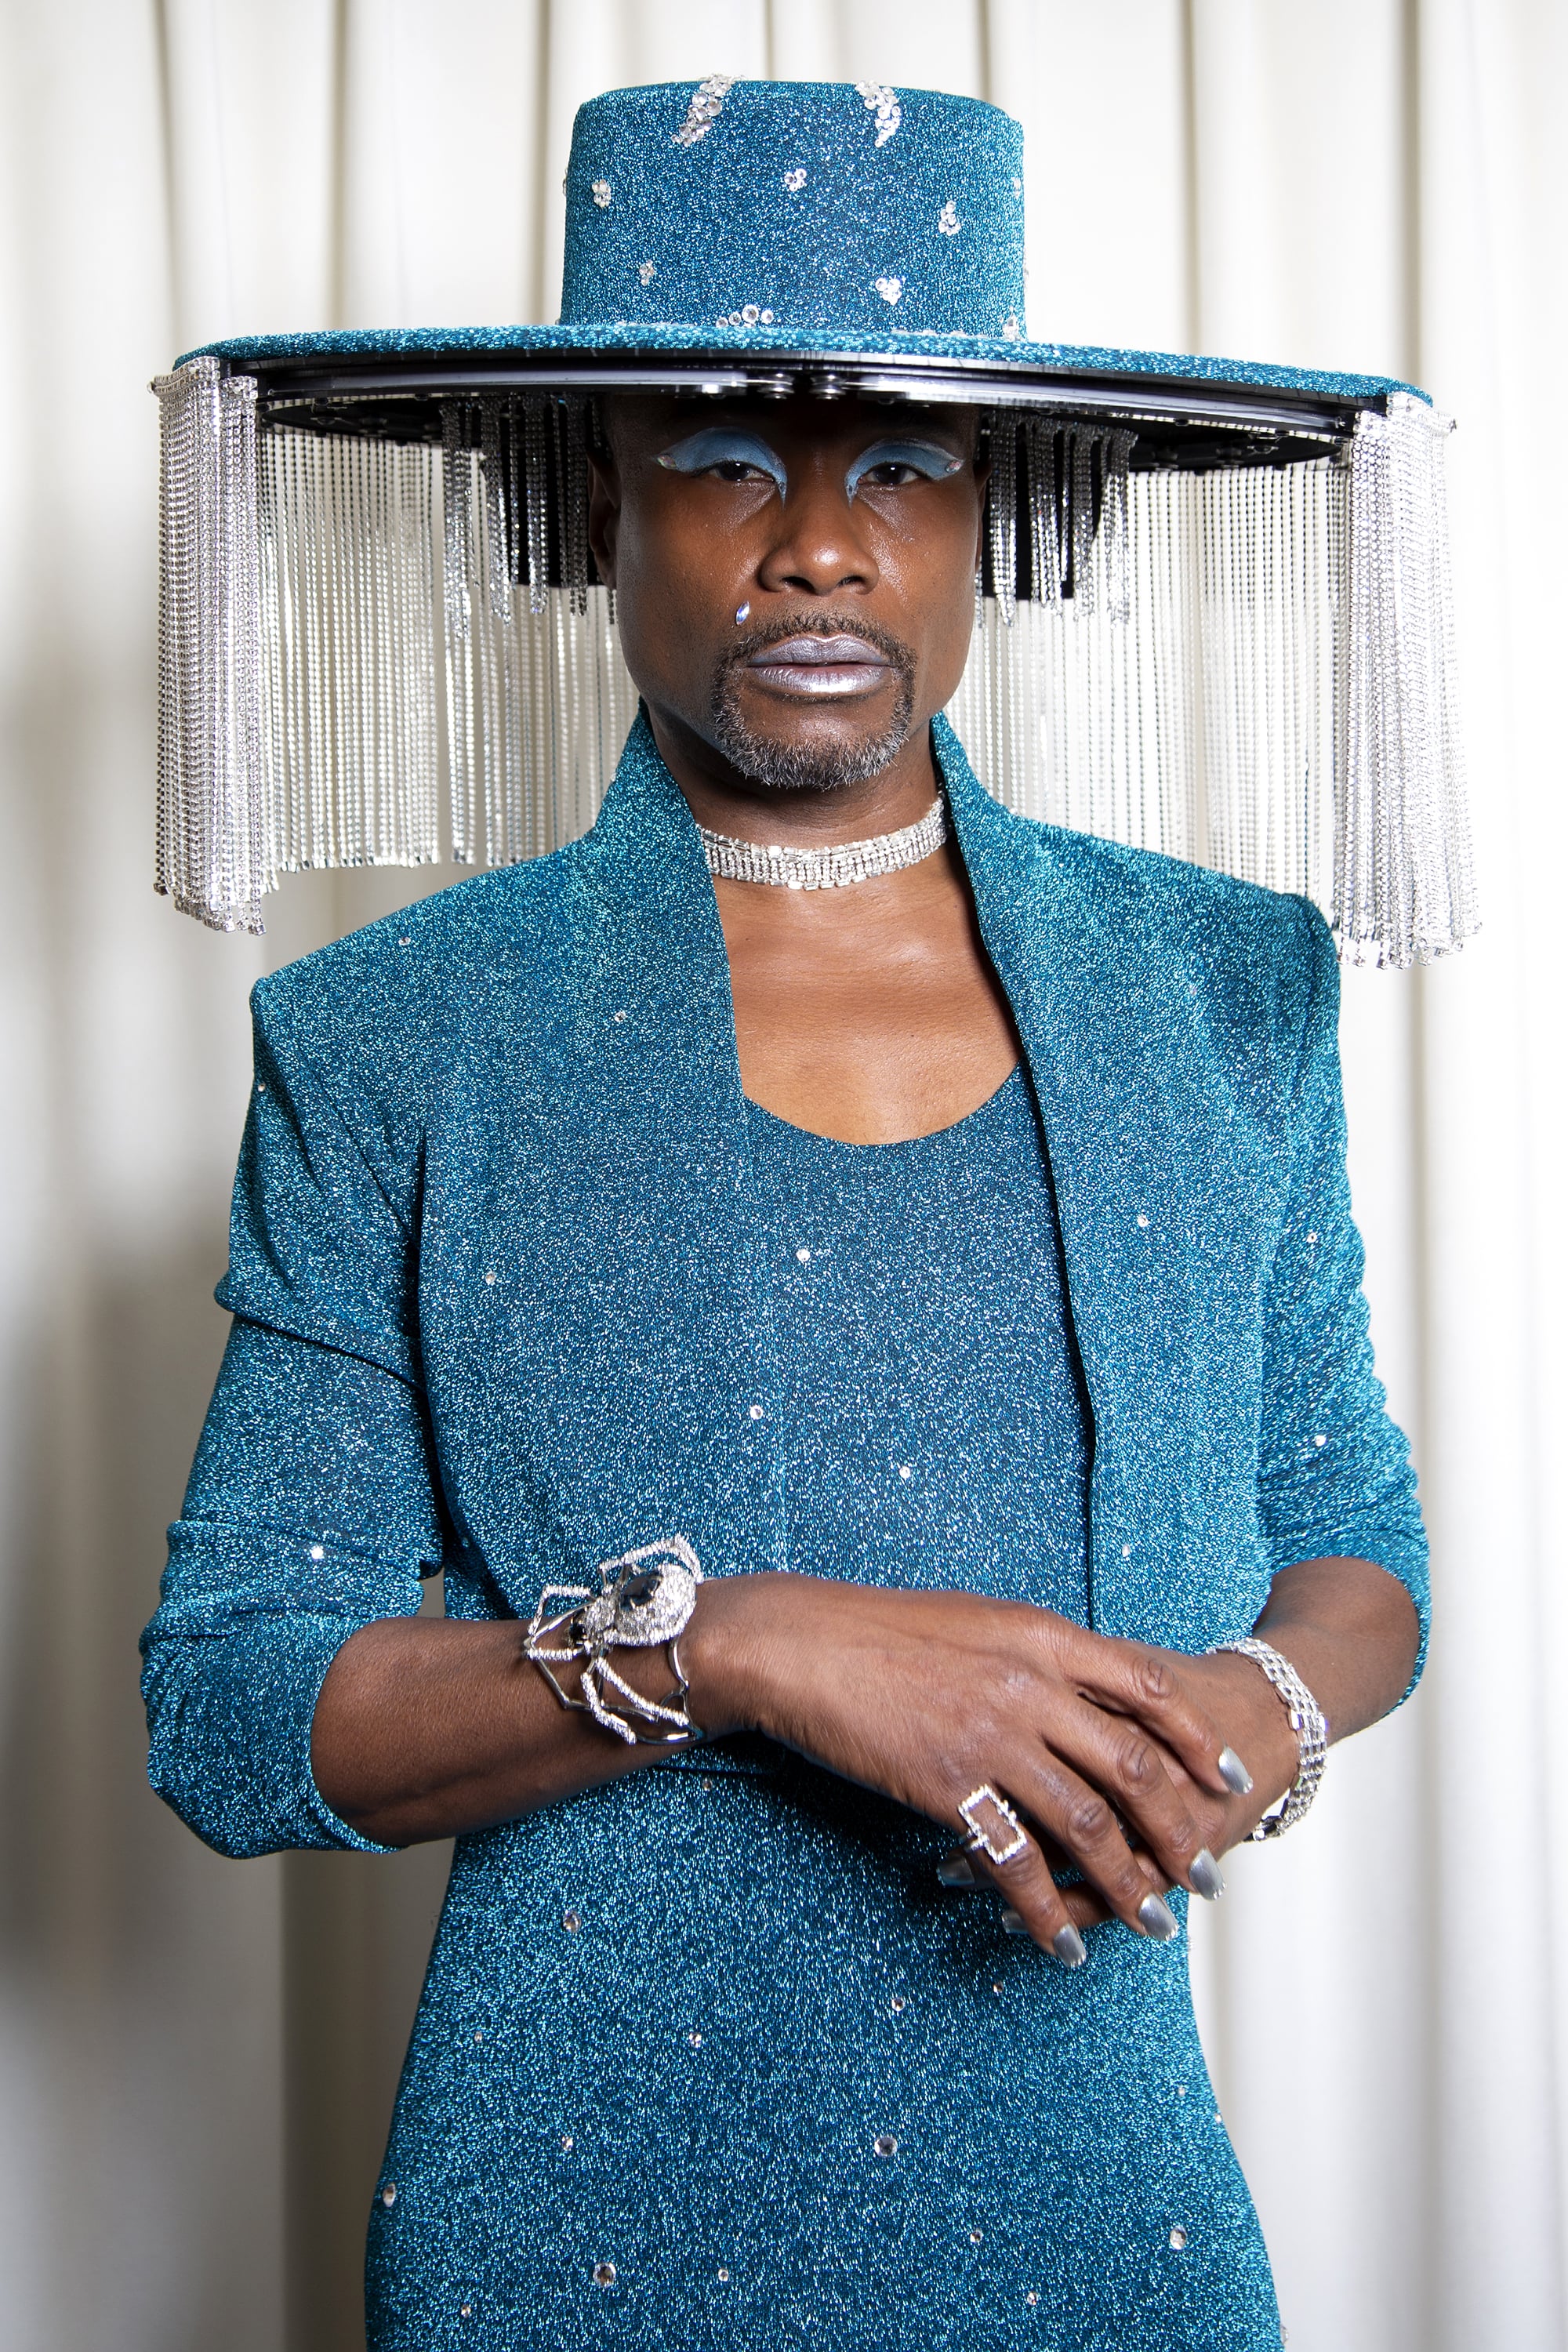 Billy Porter's Makeup at the Grammy Awards 2020